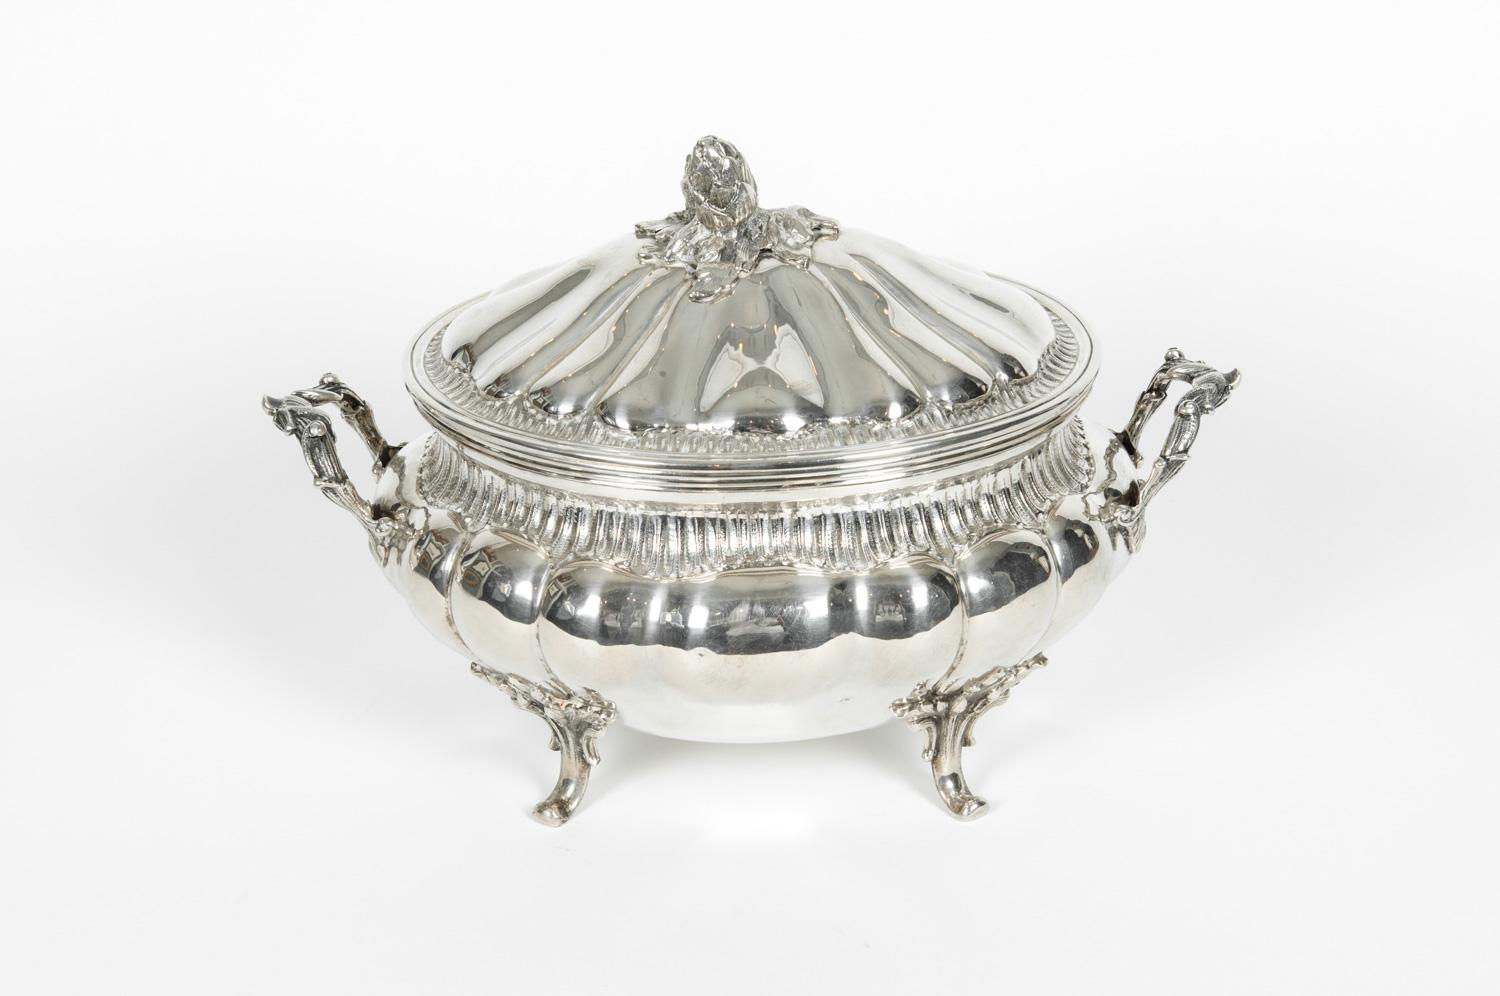 Antique sterling silver two pieces covered tureen with side handles. The covered tureen is in excellent antique condition, maker's mark undersigned. The covered tureen measure about 15 inches long x 8.5 inches width x covered 10.5 inches high.